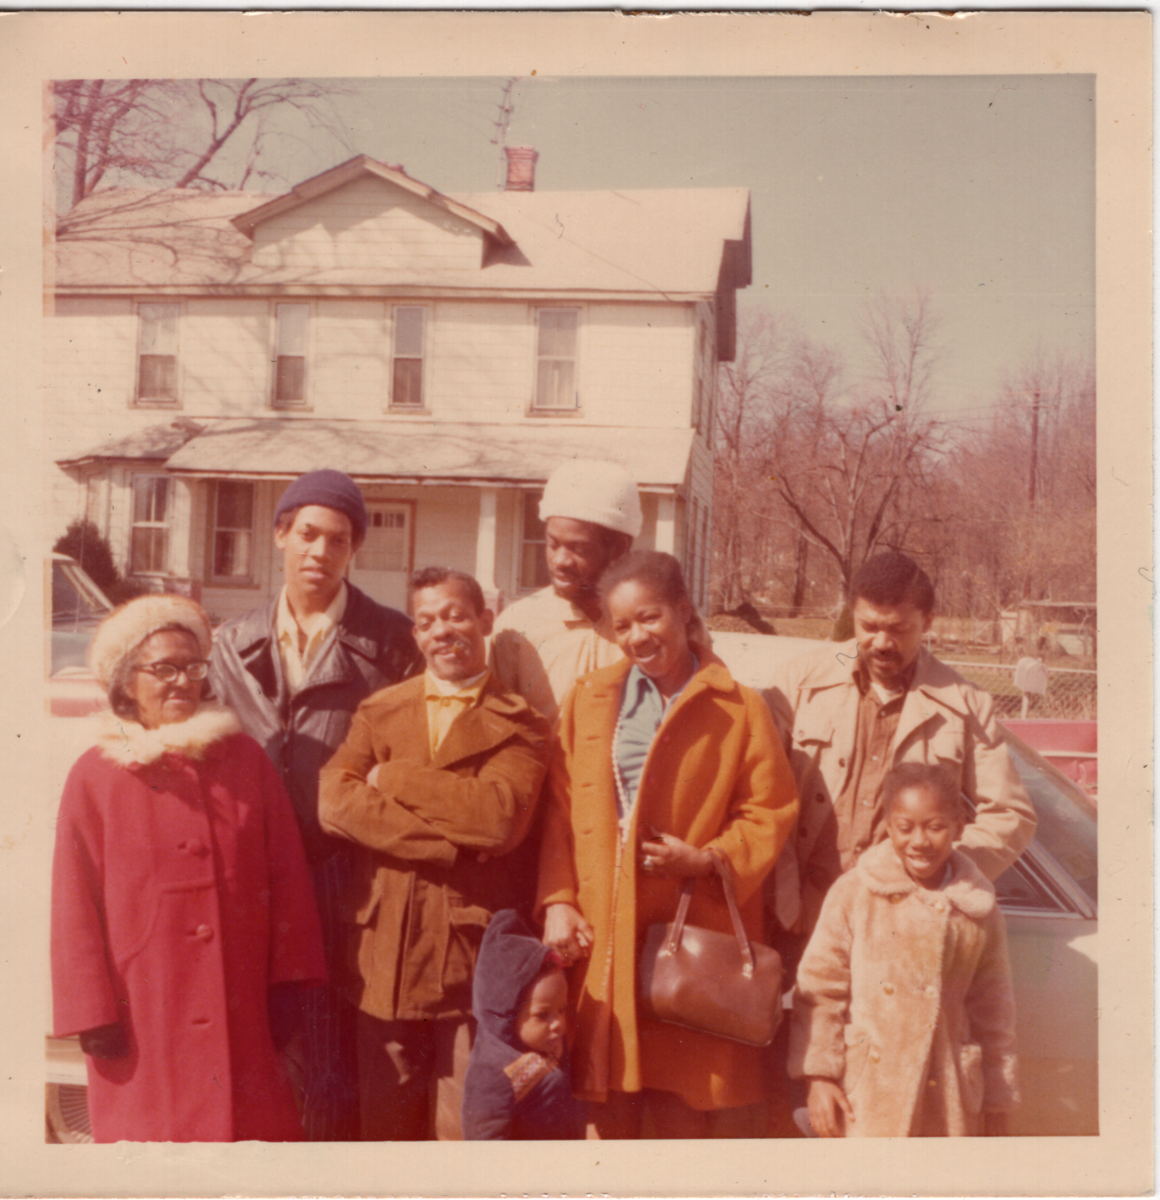 Family photo in front of the Sellers in Lakeland on Navahoe Street, across from where donor lived, in mid 70's. Pictured are Donor's mother, Carry, Moses, Boy, Osceola Sr. and Jr., and unknown on the far right. 